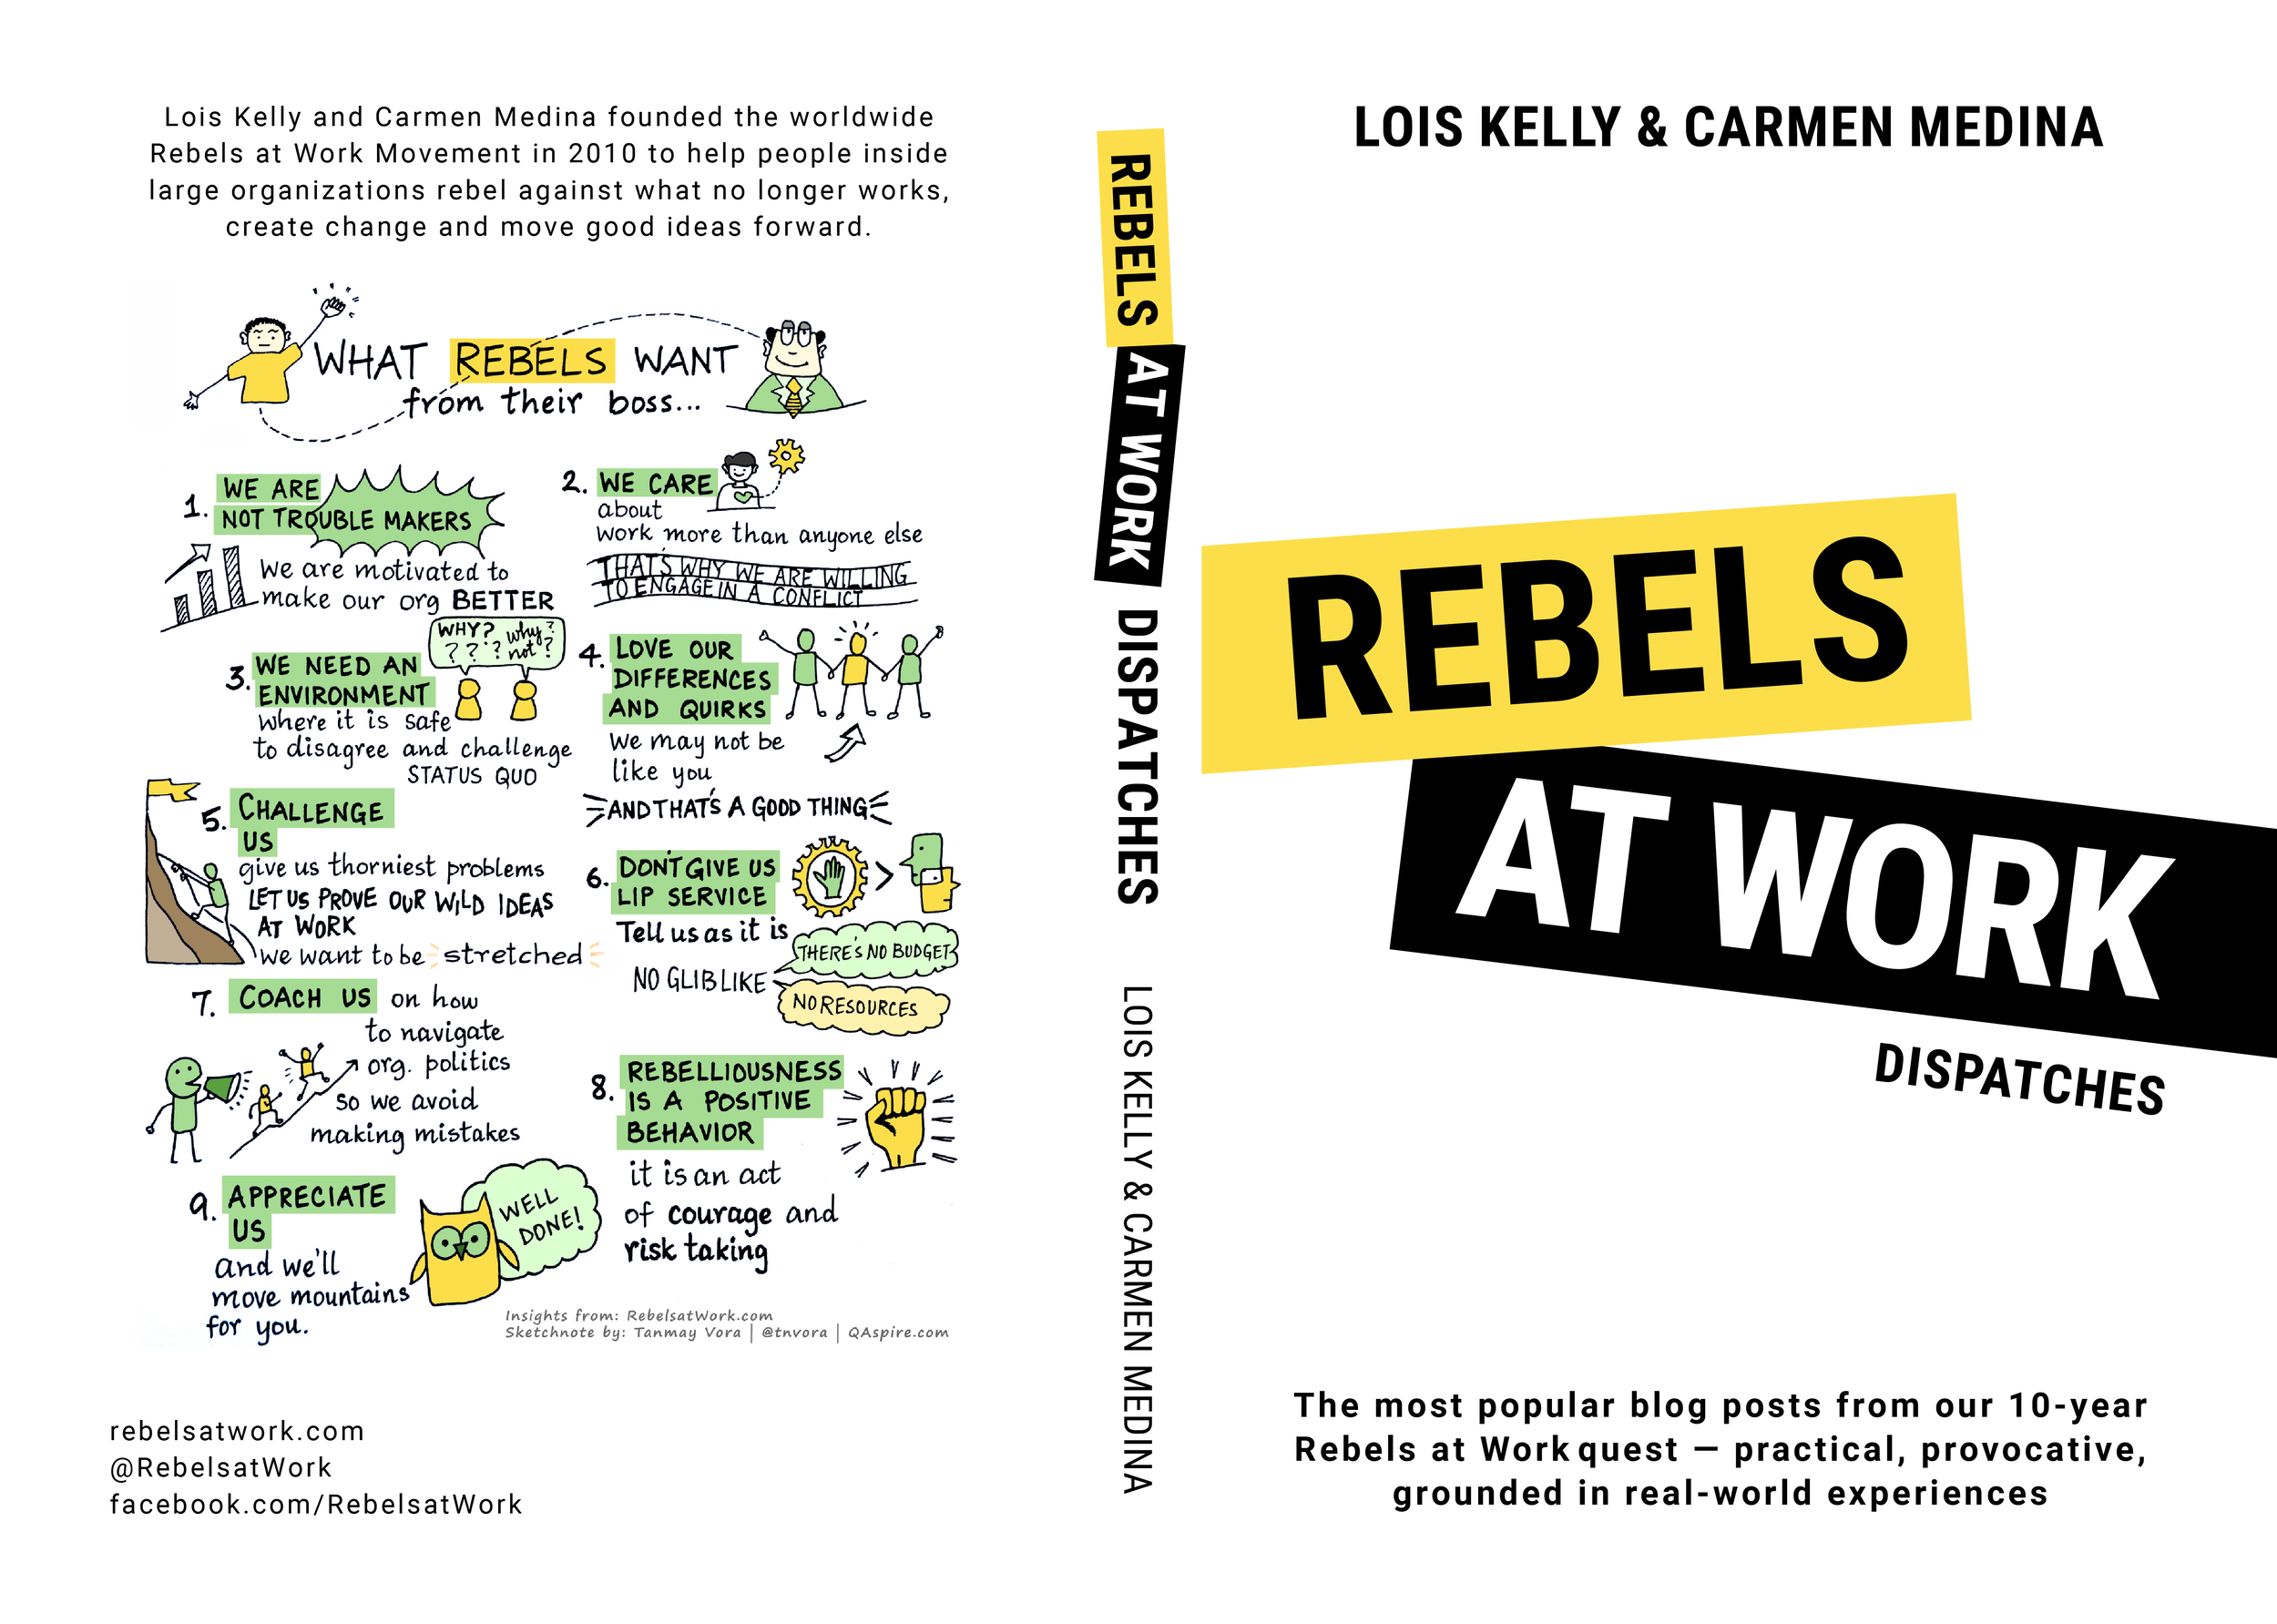 Rebels At Work_Cover_FINAL_XL_FULL.png